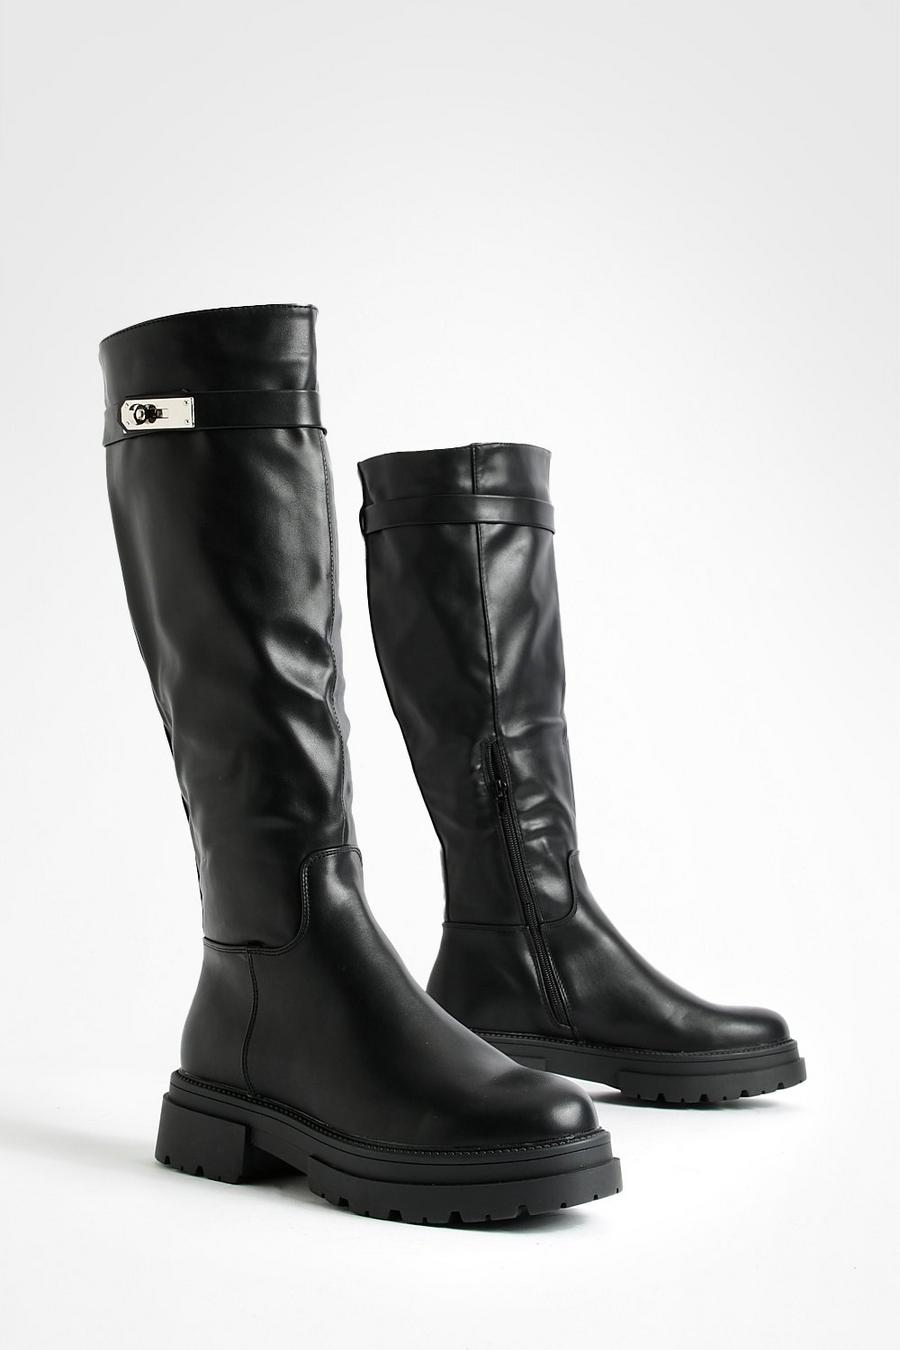 Buckle Detail Chunky Flat Knee High Biker Boots image number 1